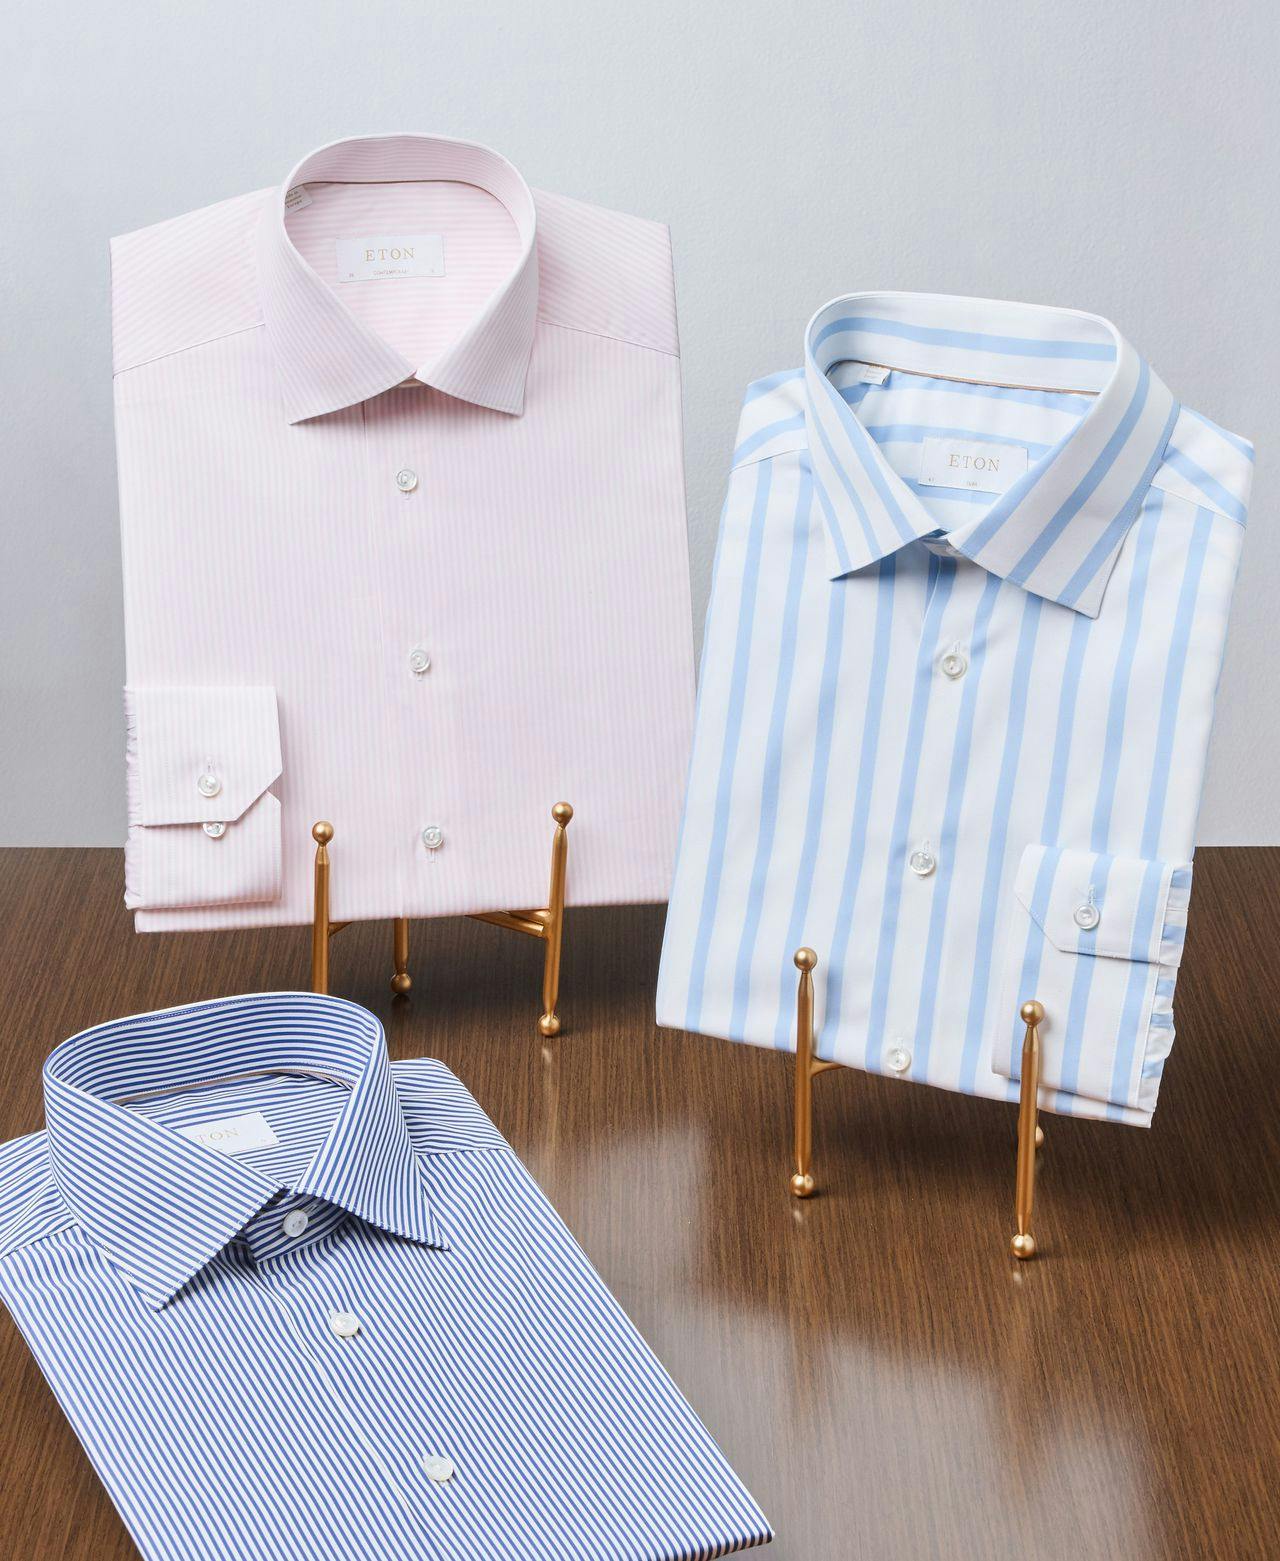 two dress shirts displayed on standand one on table